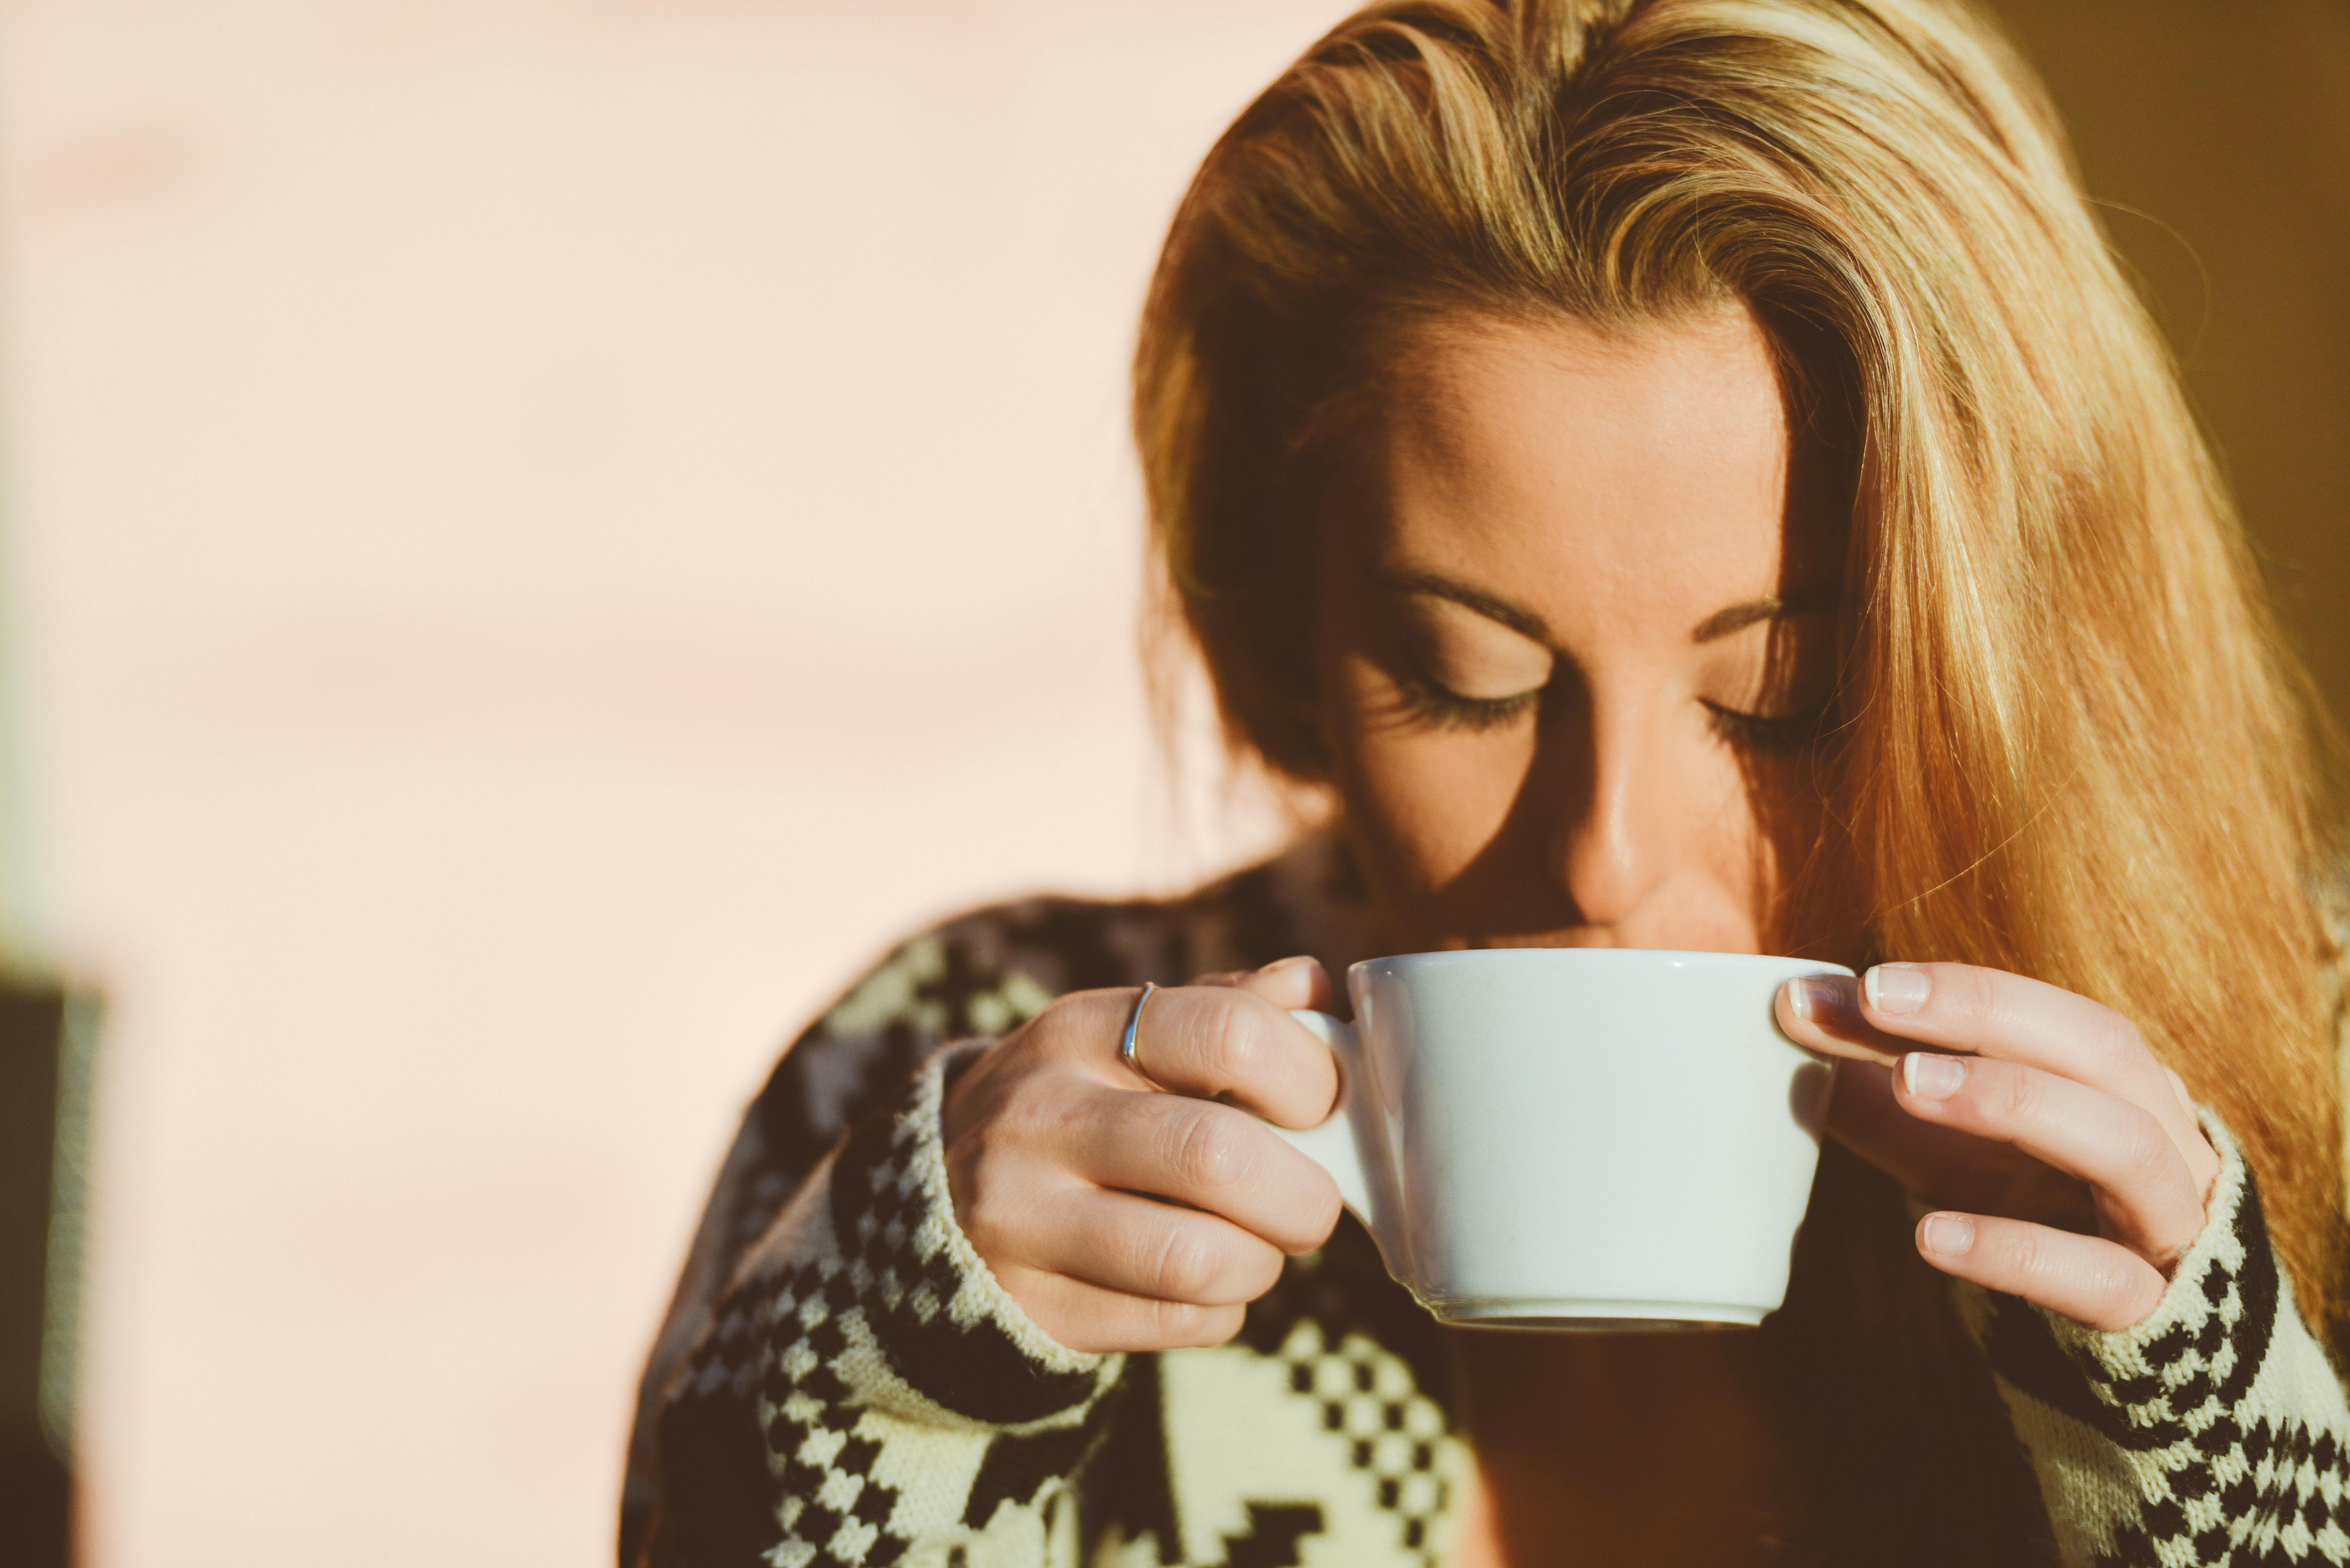 https://static.pexels.com/photos/5186/person-woman-coffee-cup.jpg